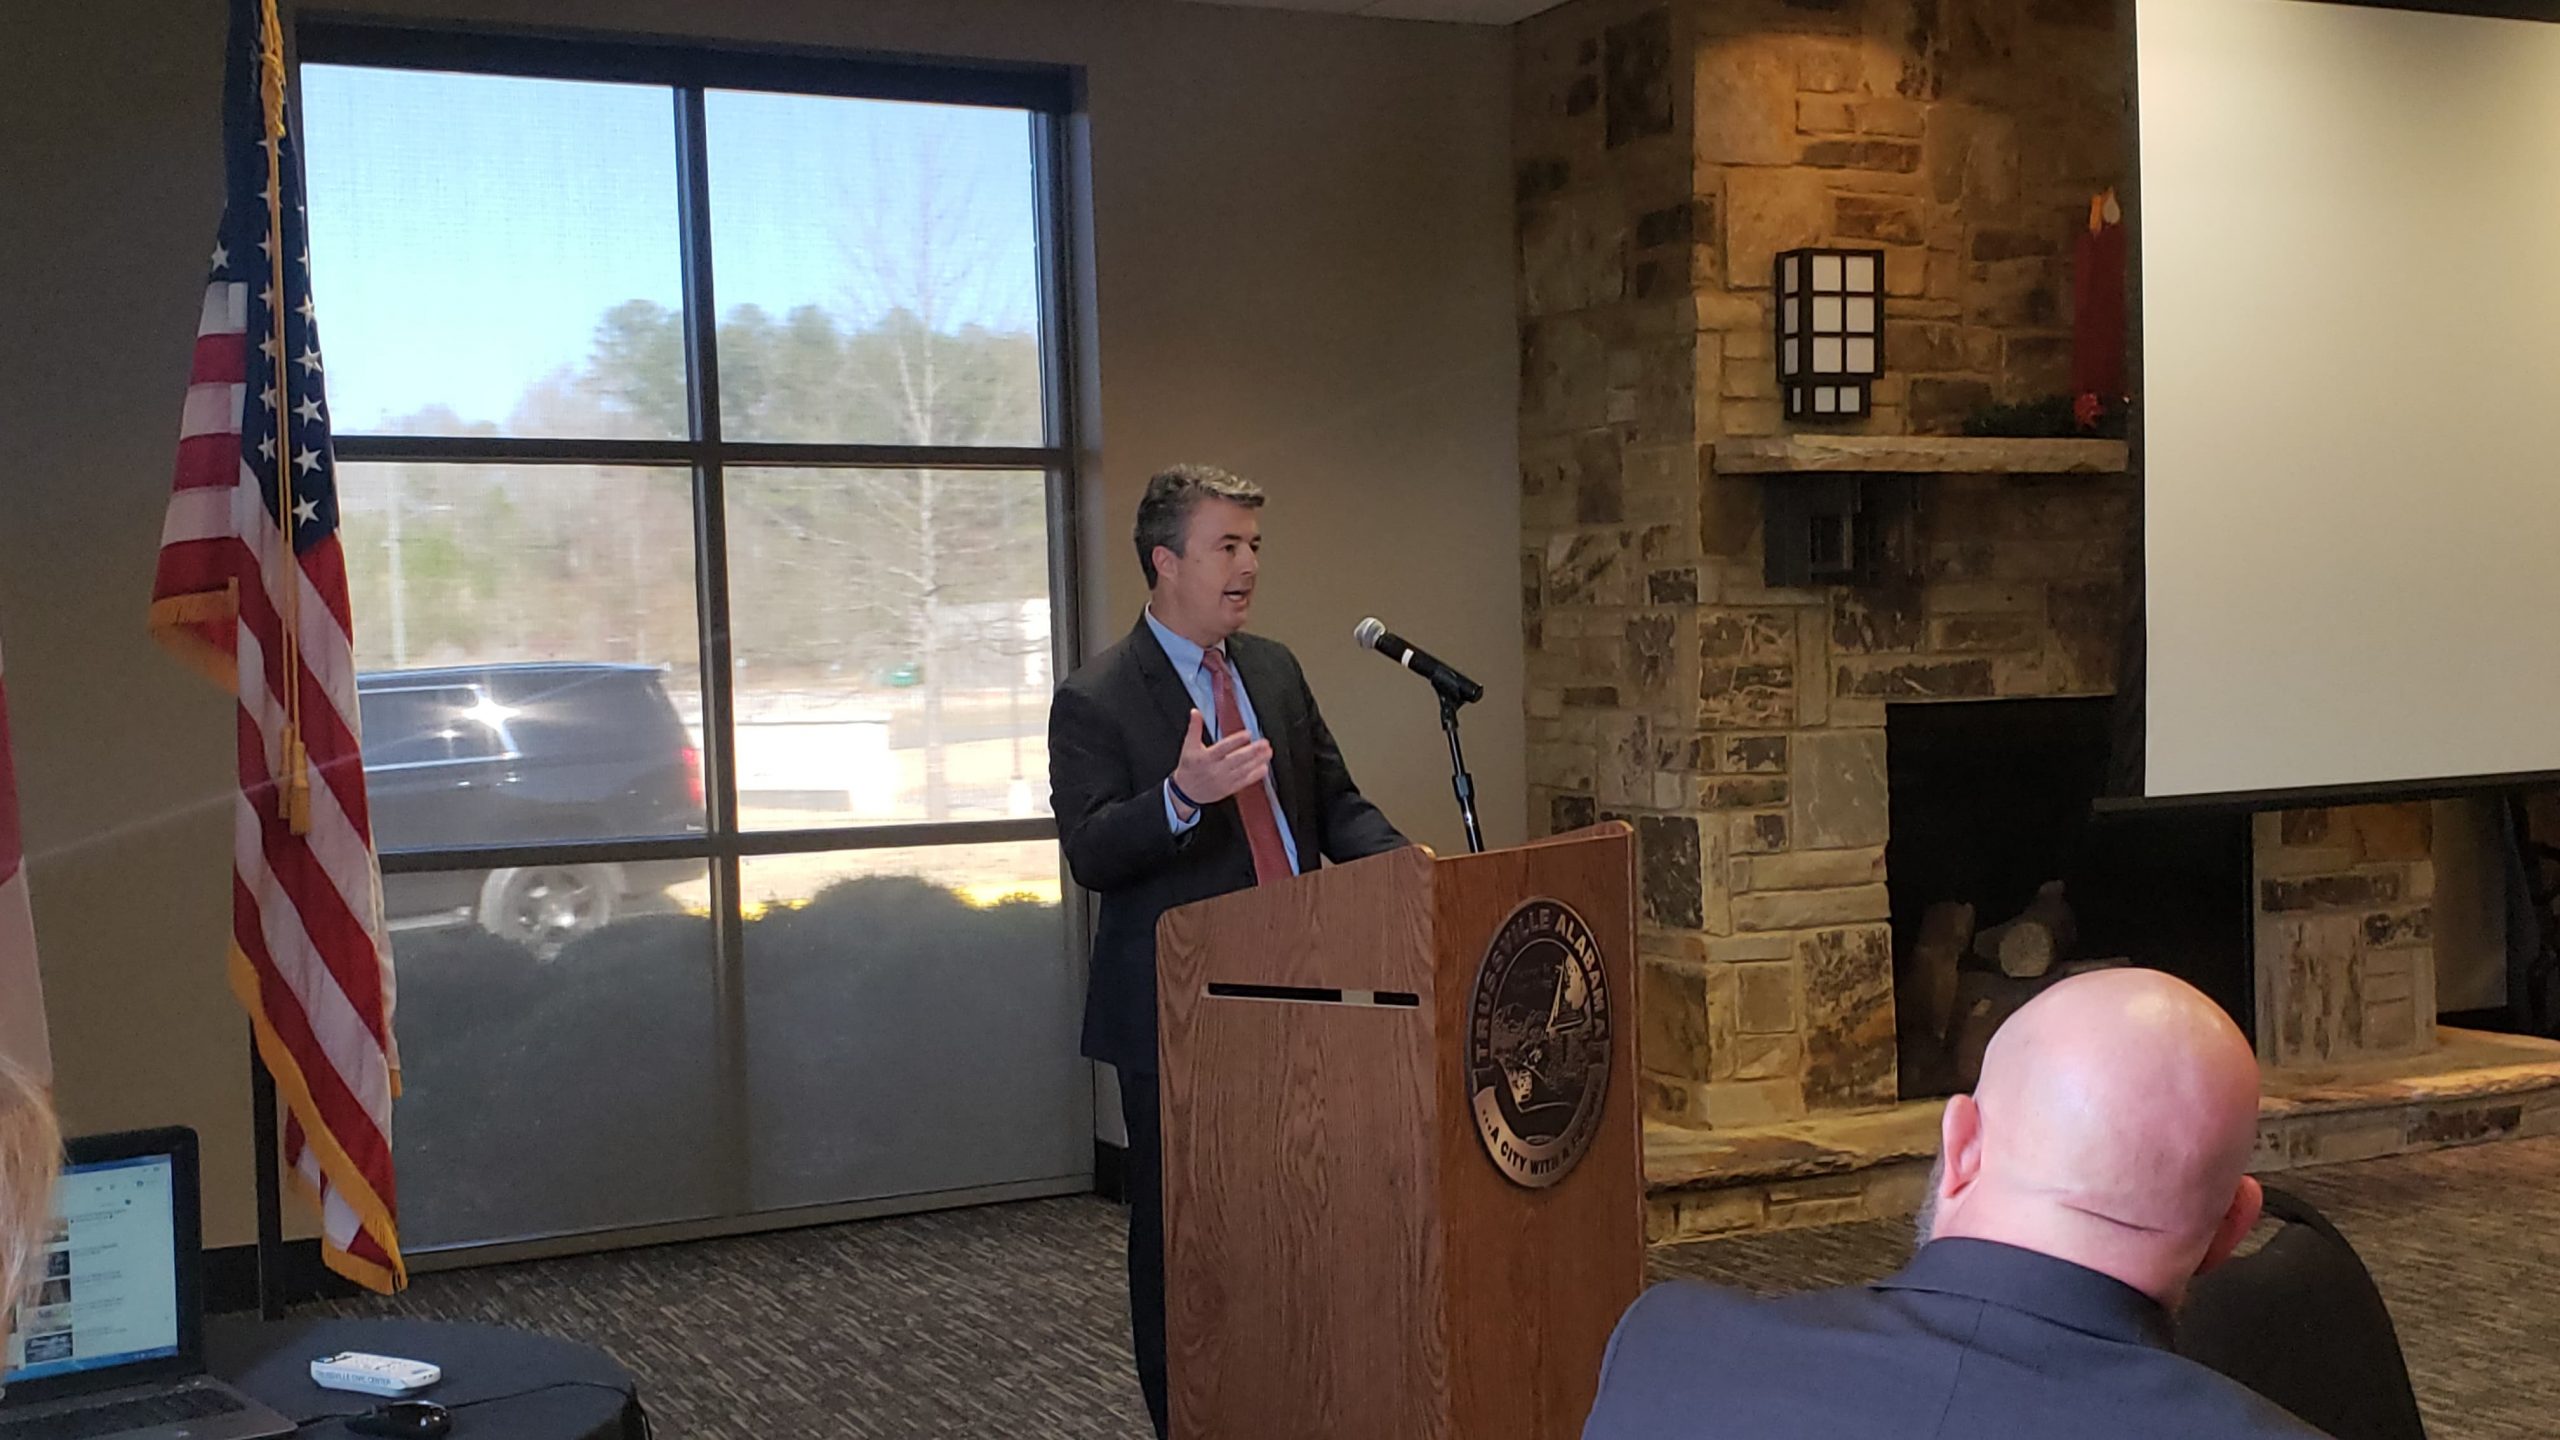 OPINION: Executive Director of Trussville Area Chamber of Commerce on reopening the economy